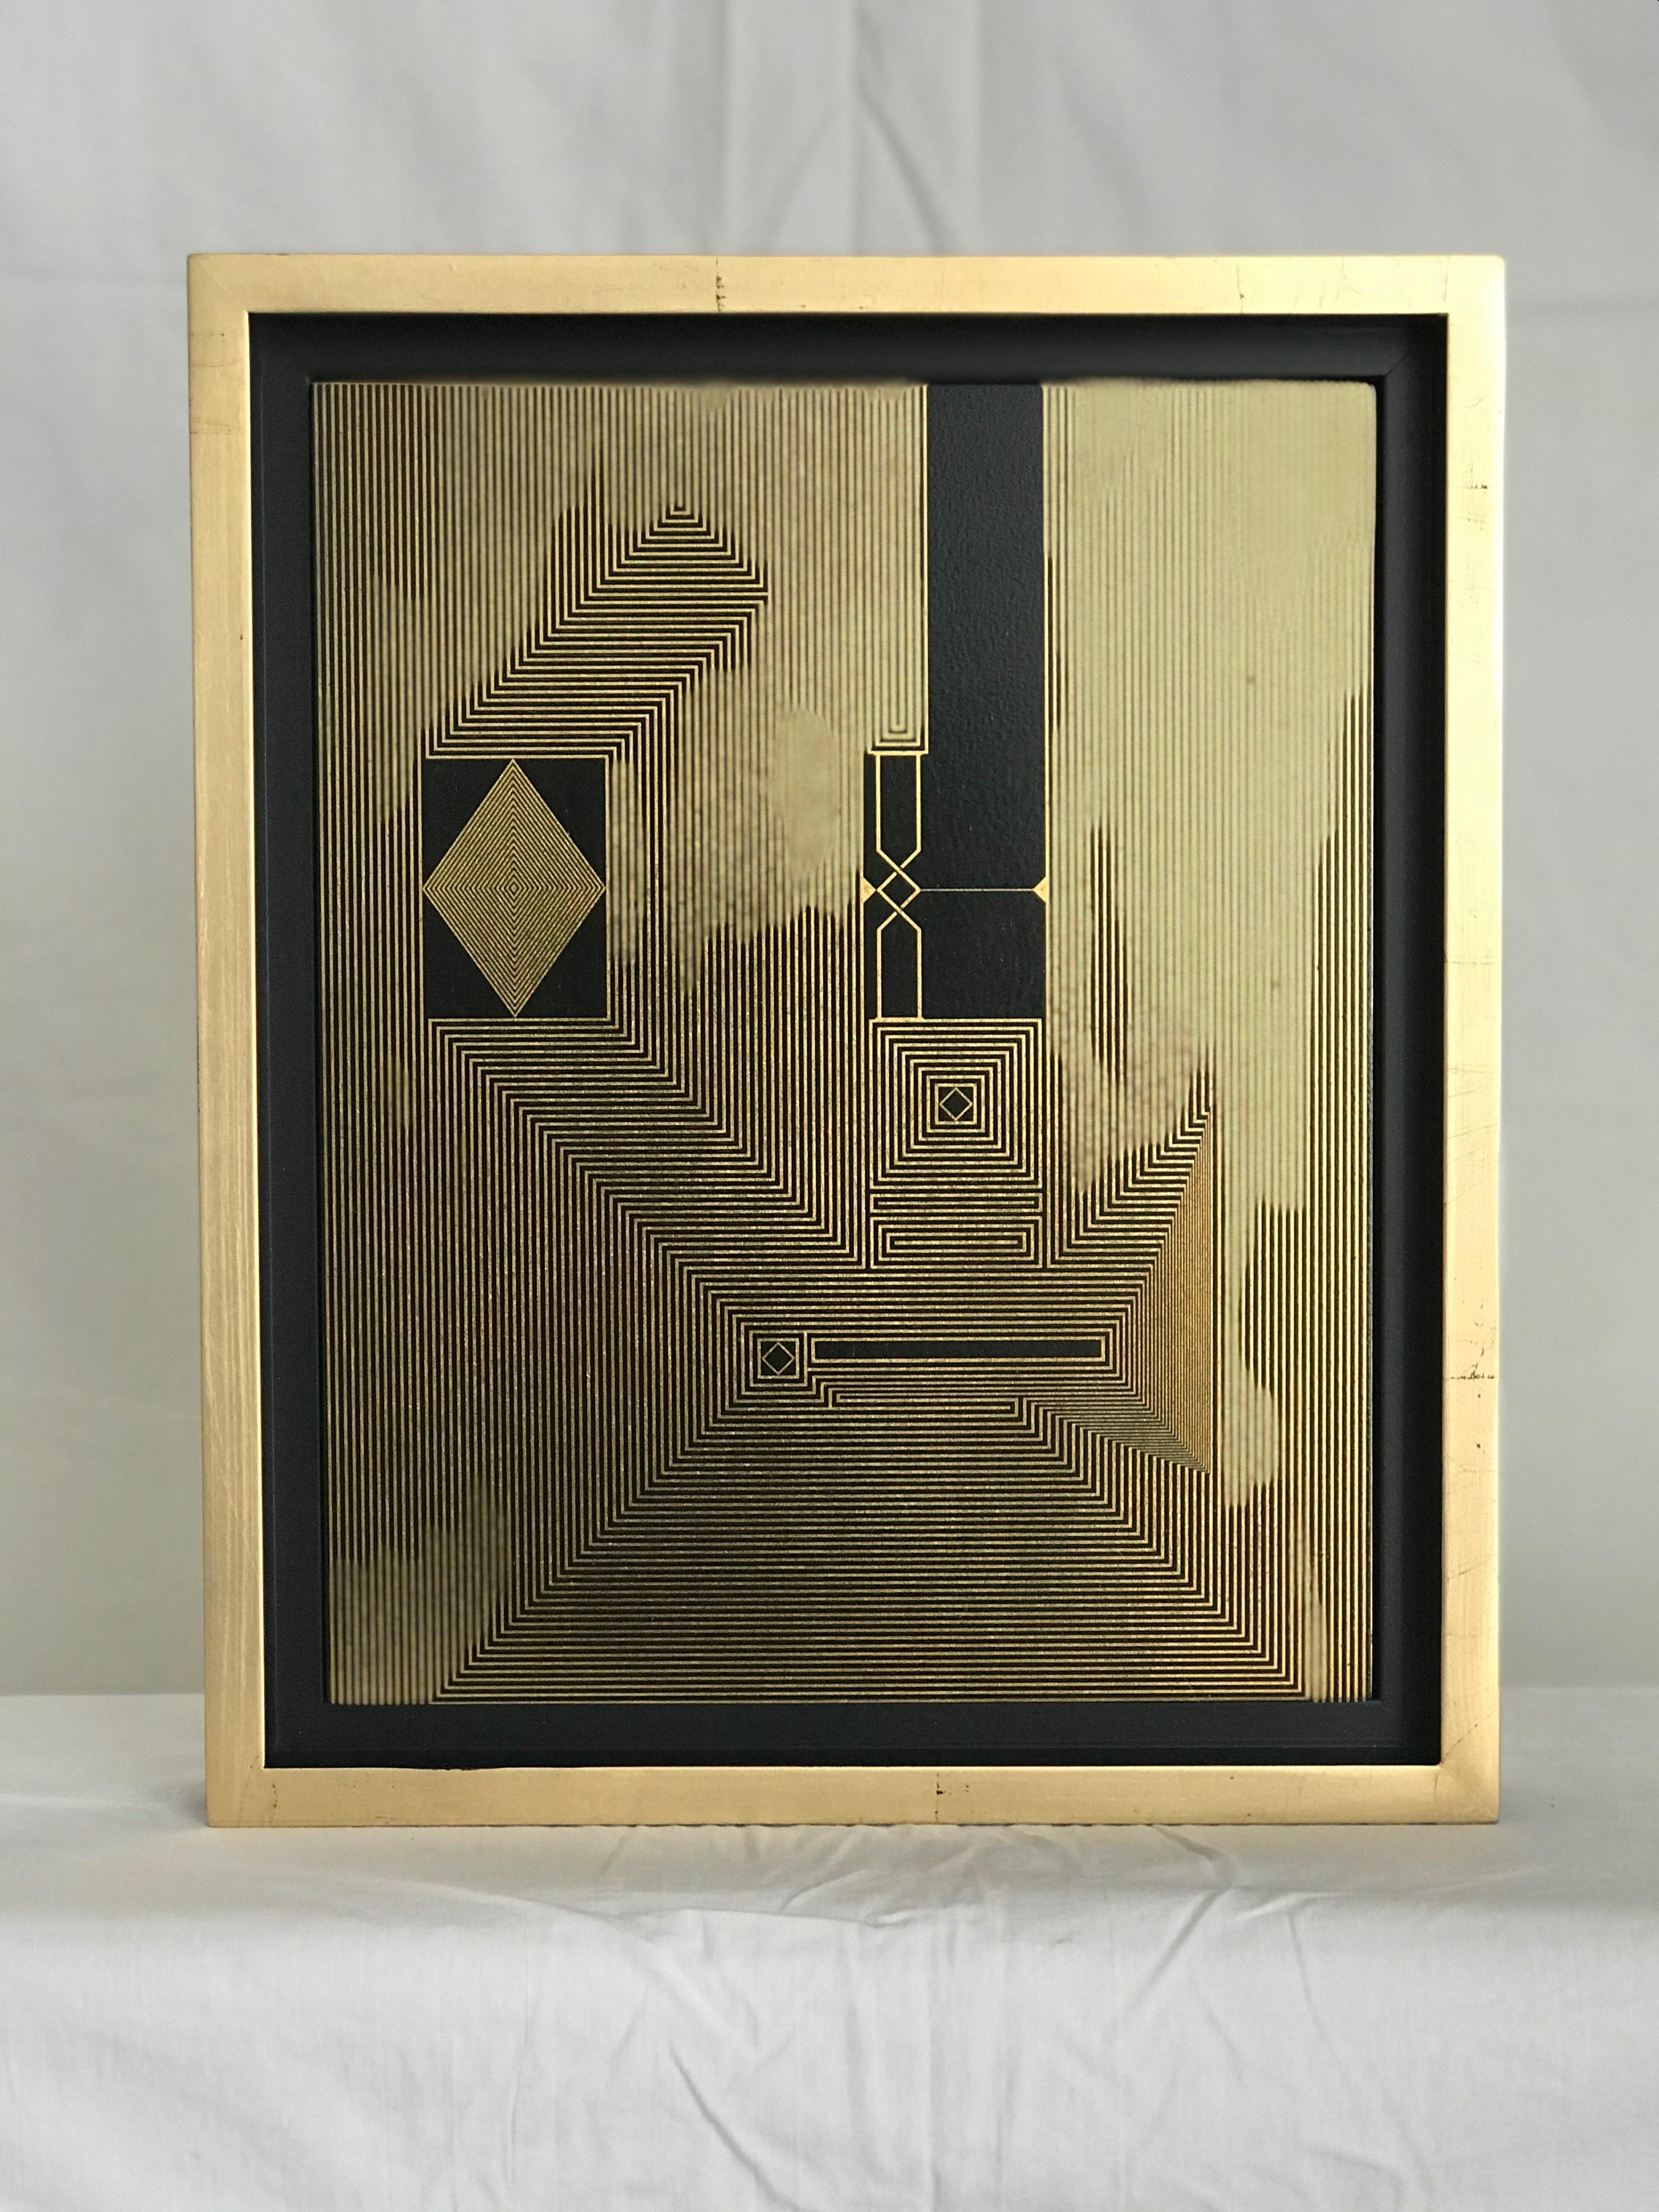 Untitled 17, 2019 by Francisco Larios
Lacquer, Acrylic, oil, and gold leaf on MDF Deep
Image Size: 11.5 in. H x 9.5 in. W
Frame Size: 14 in. H x 11.6 in. W x 1.5 in. D
One of a kind.

 From the  Mexican Ryōan-ji Series.
Ryōan-ji is the Japanese Zen